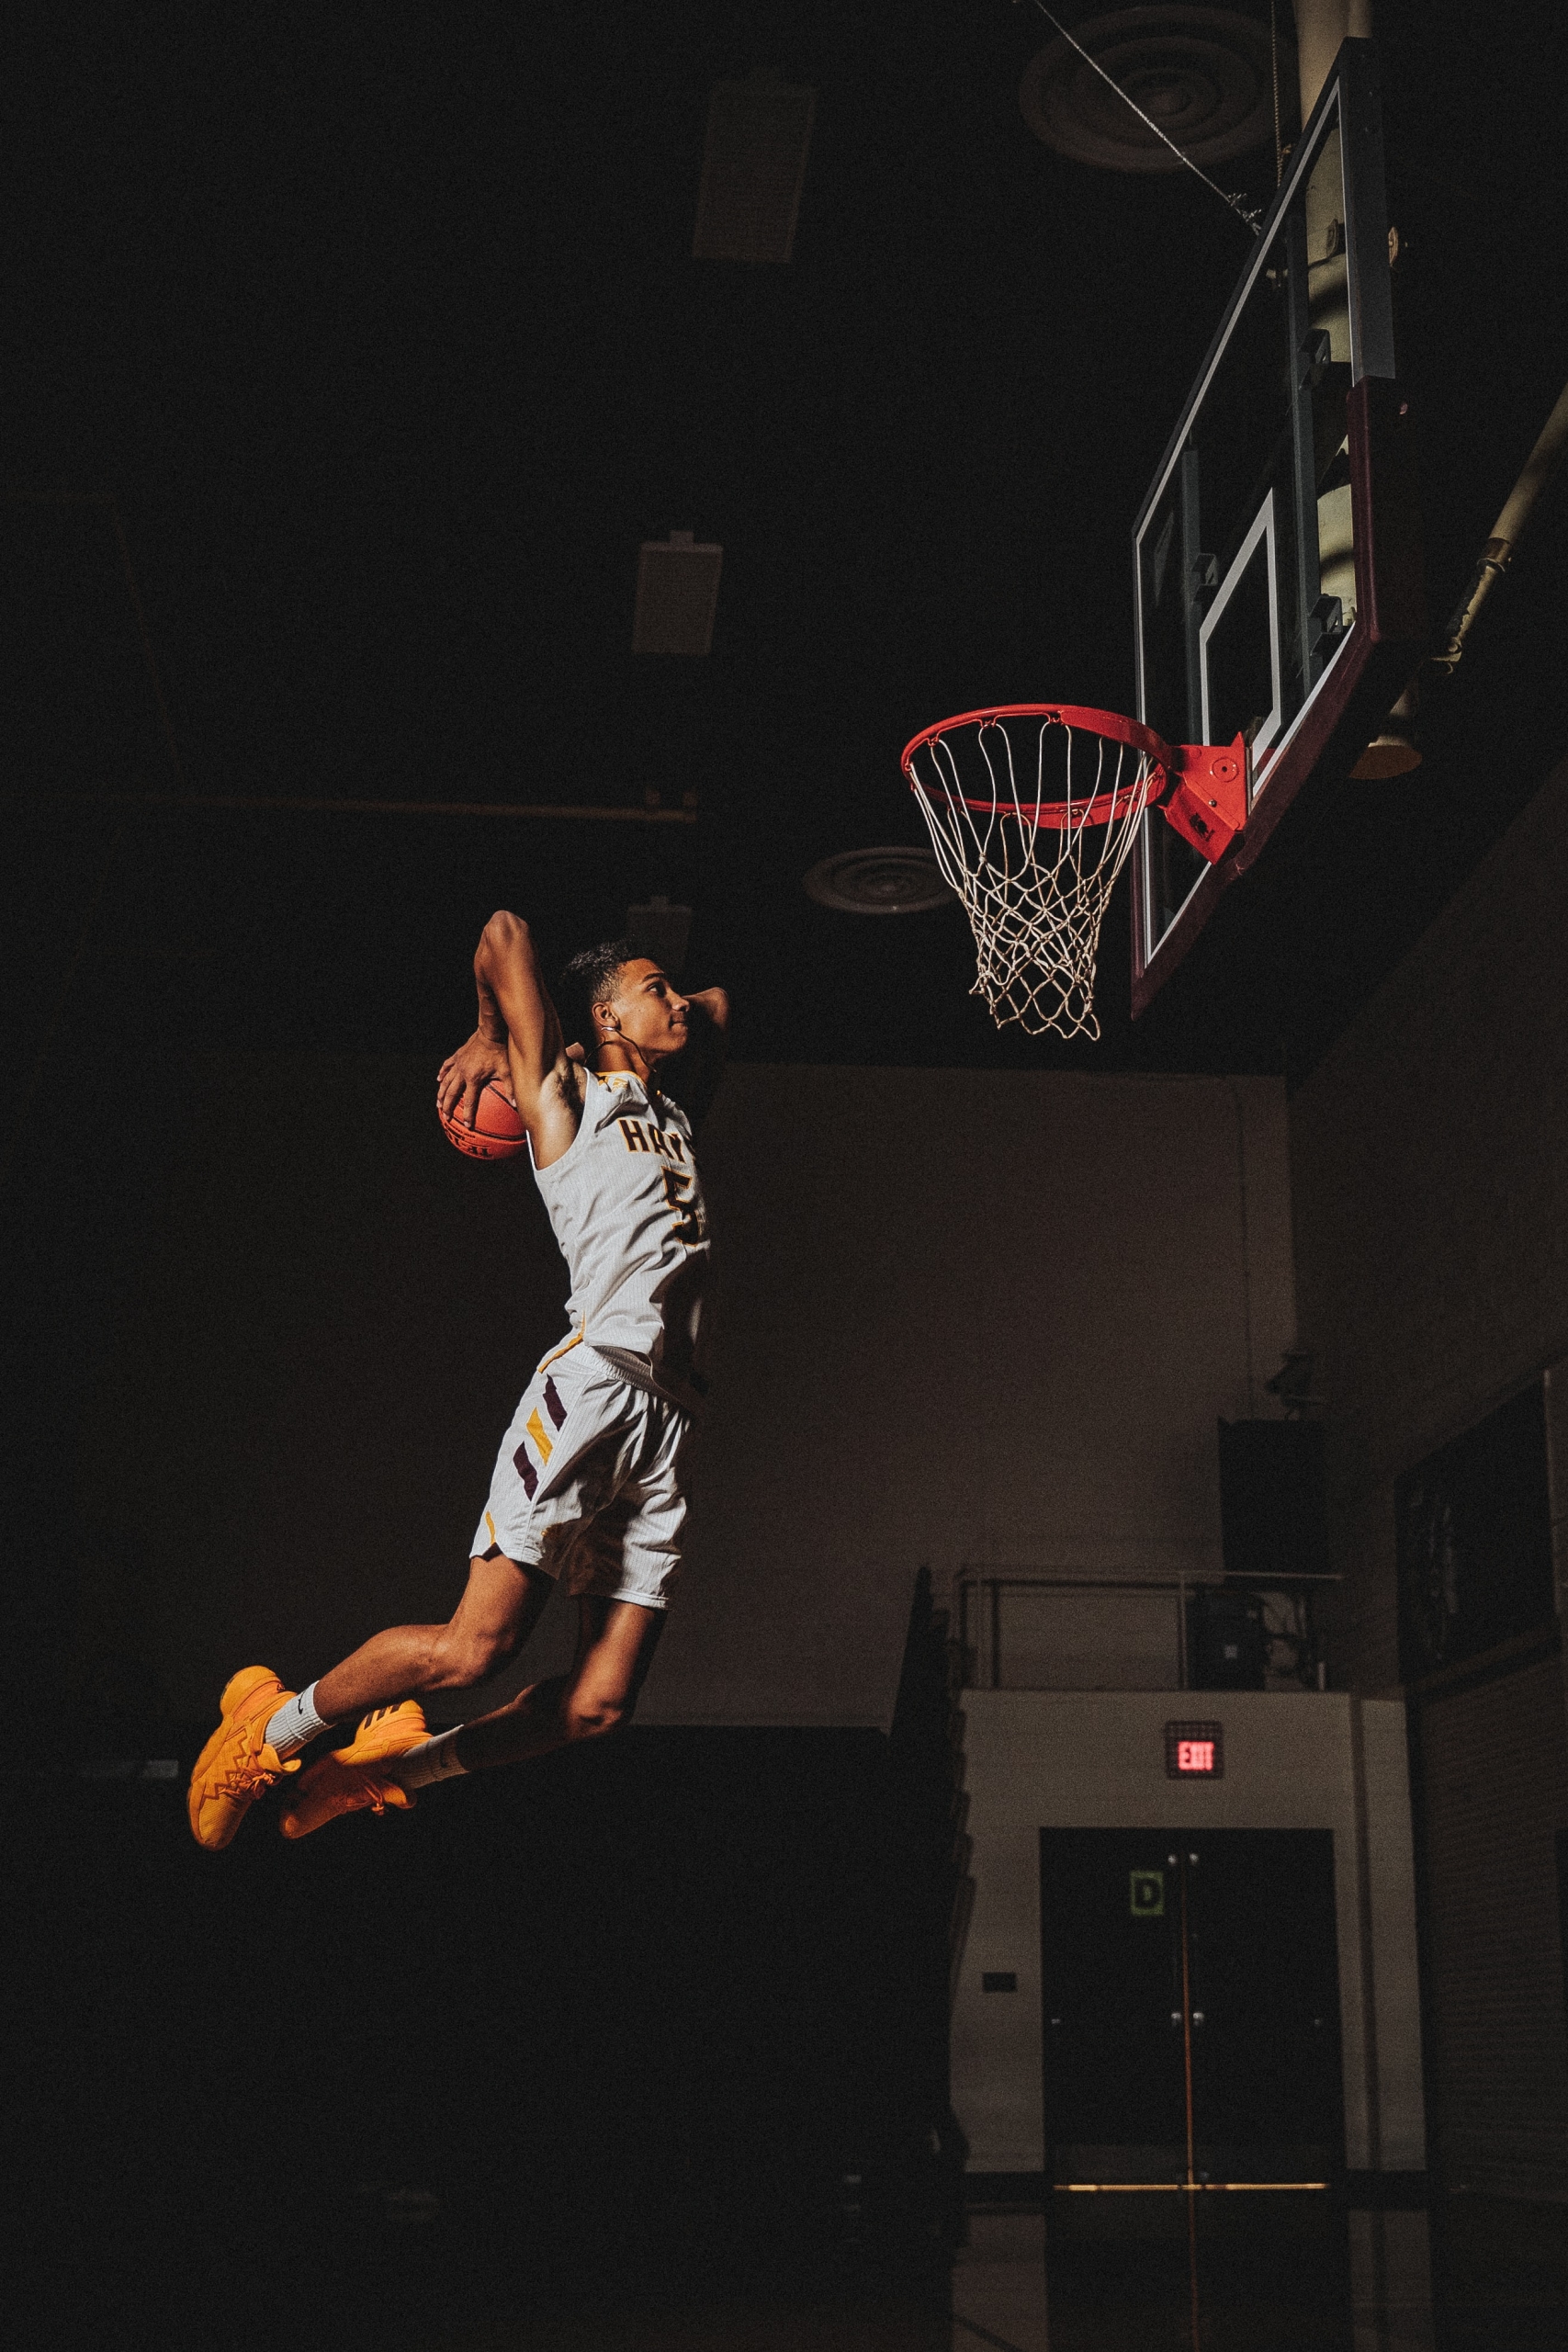 A basketball player dunking the ball